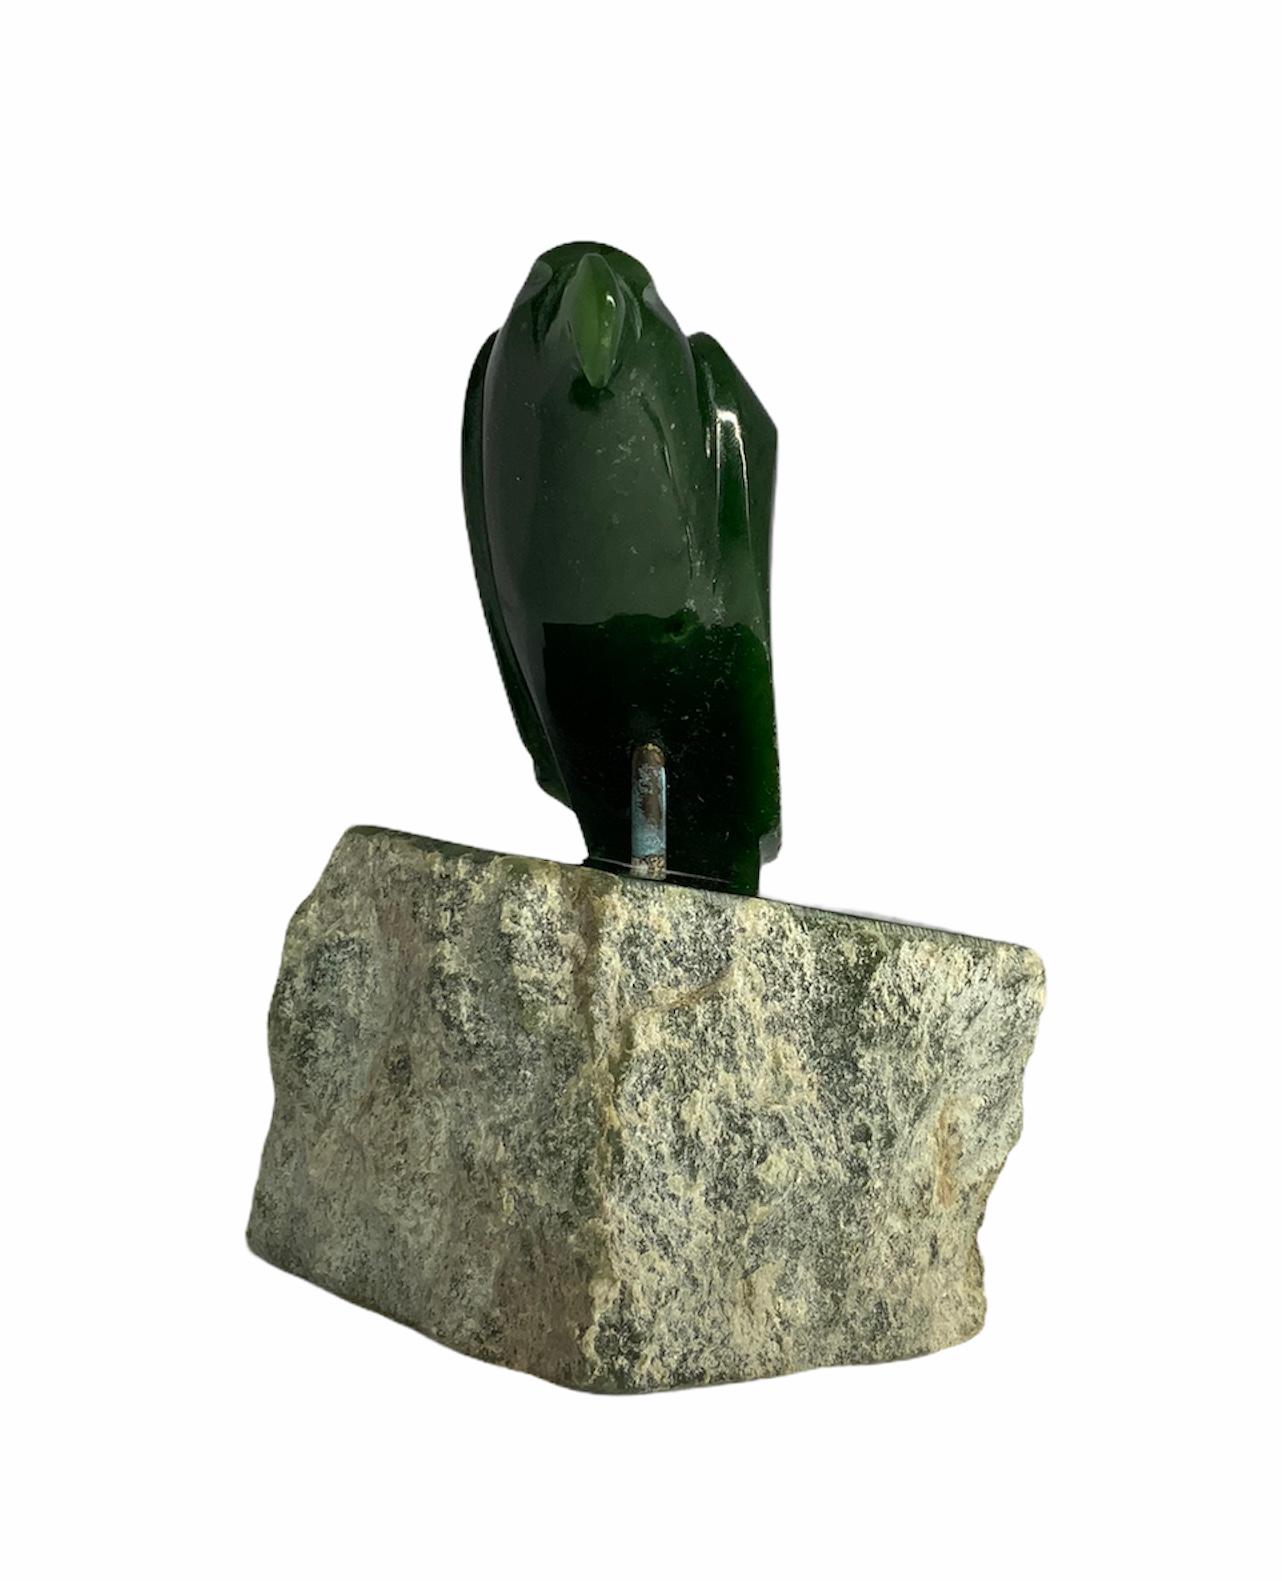 This is a finely carved Canadian Jade stone depicting a raven standing over a crude Jade rock.